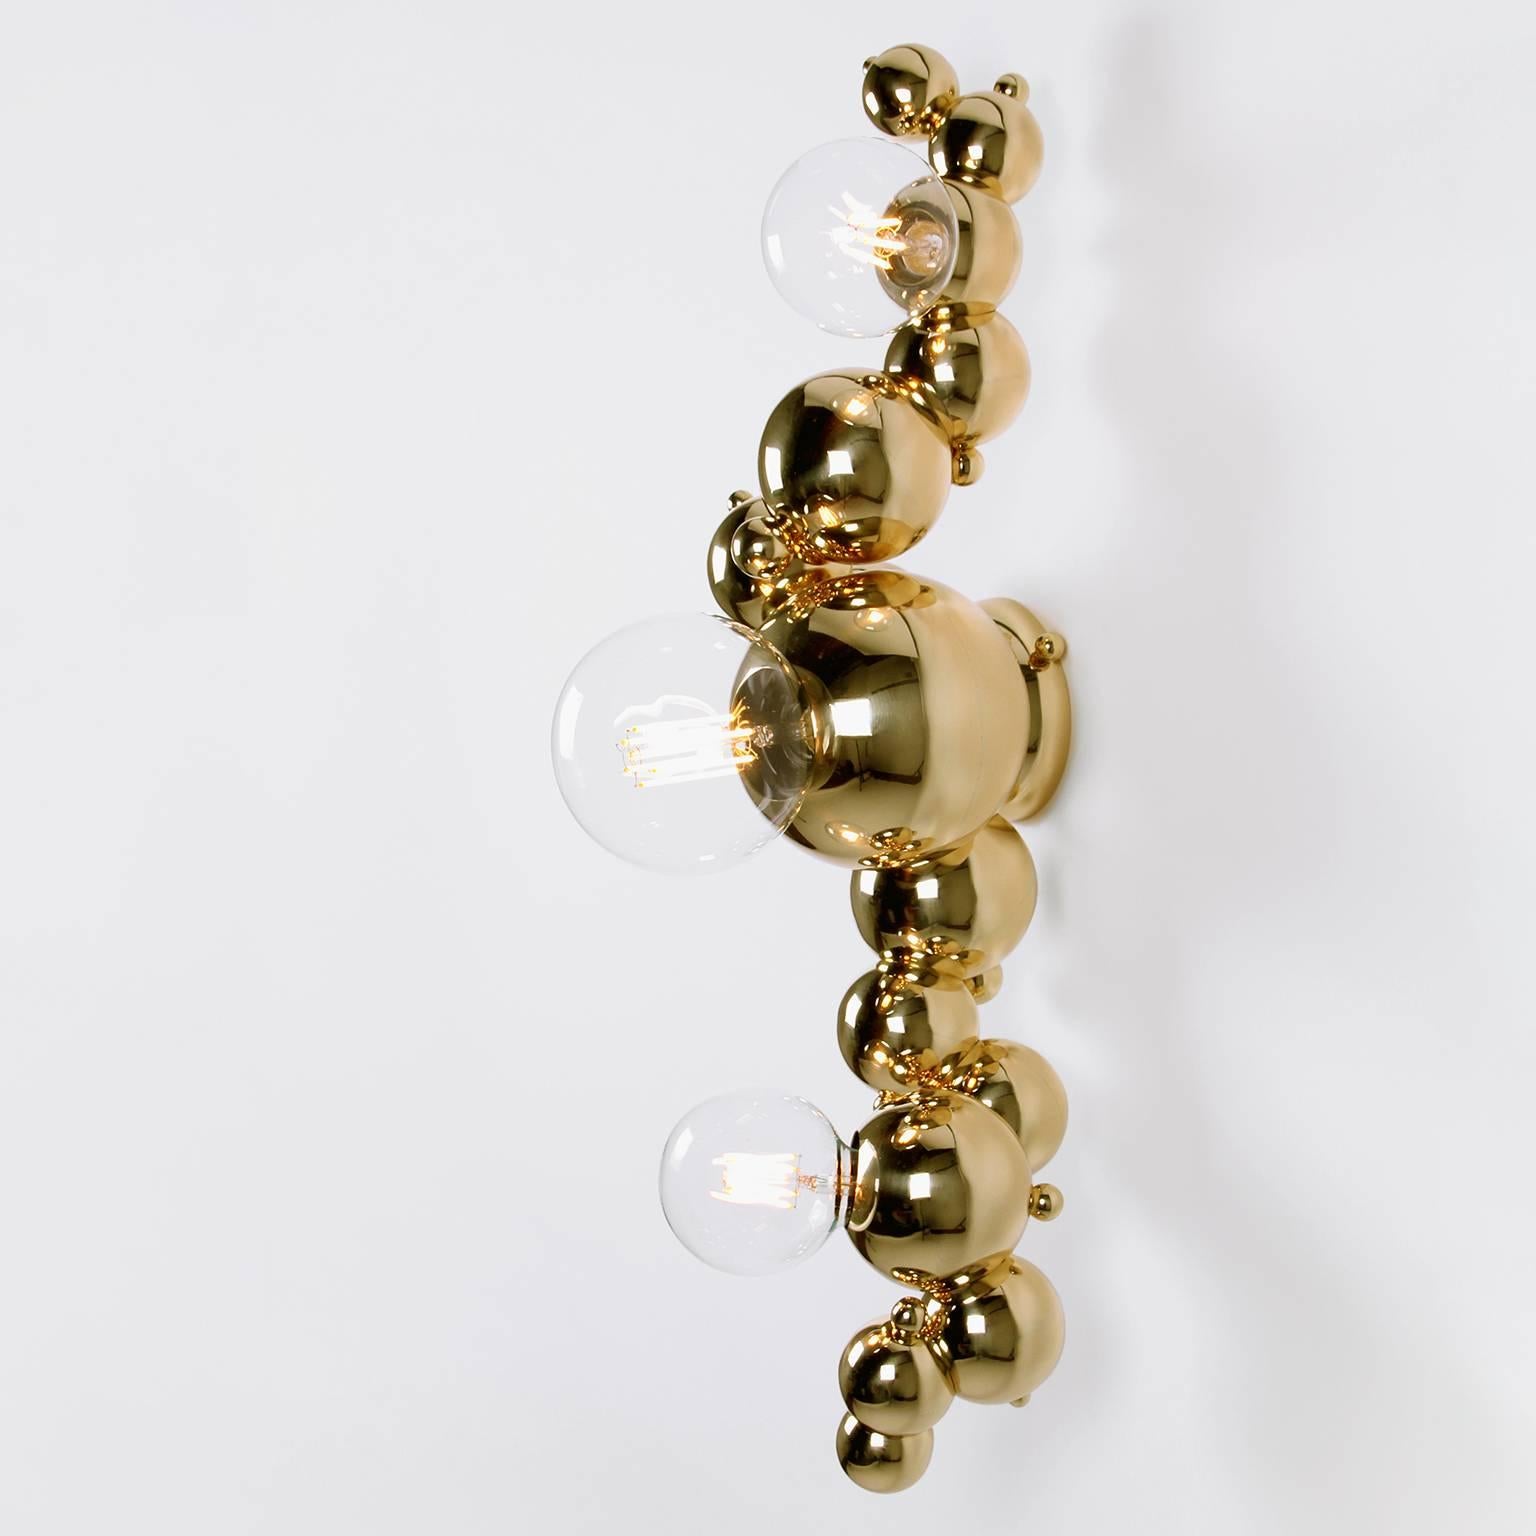 American Bubbly 03 Light Wall Mount, Modern Molecule Sculptural Sconce, Polished Brass